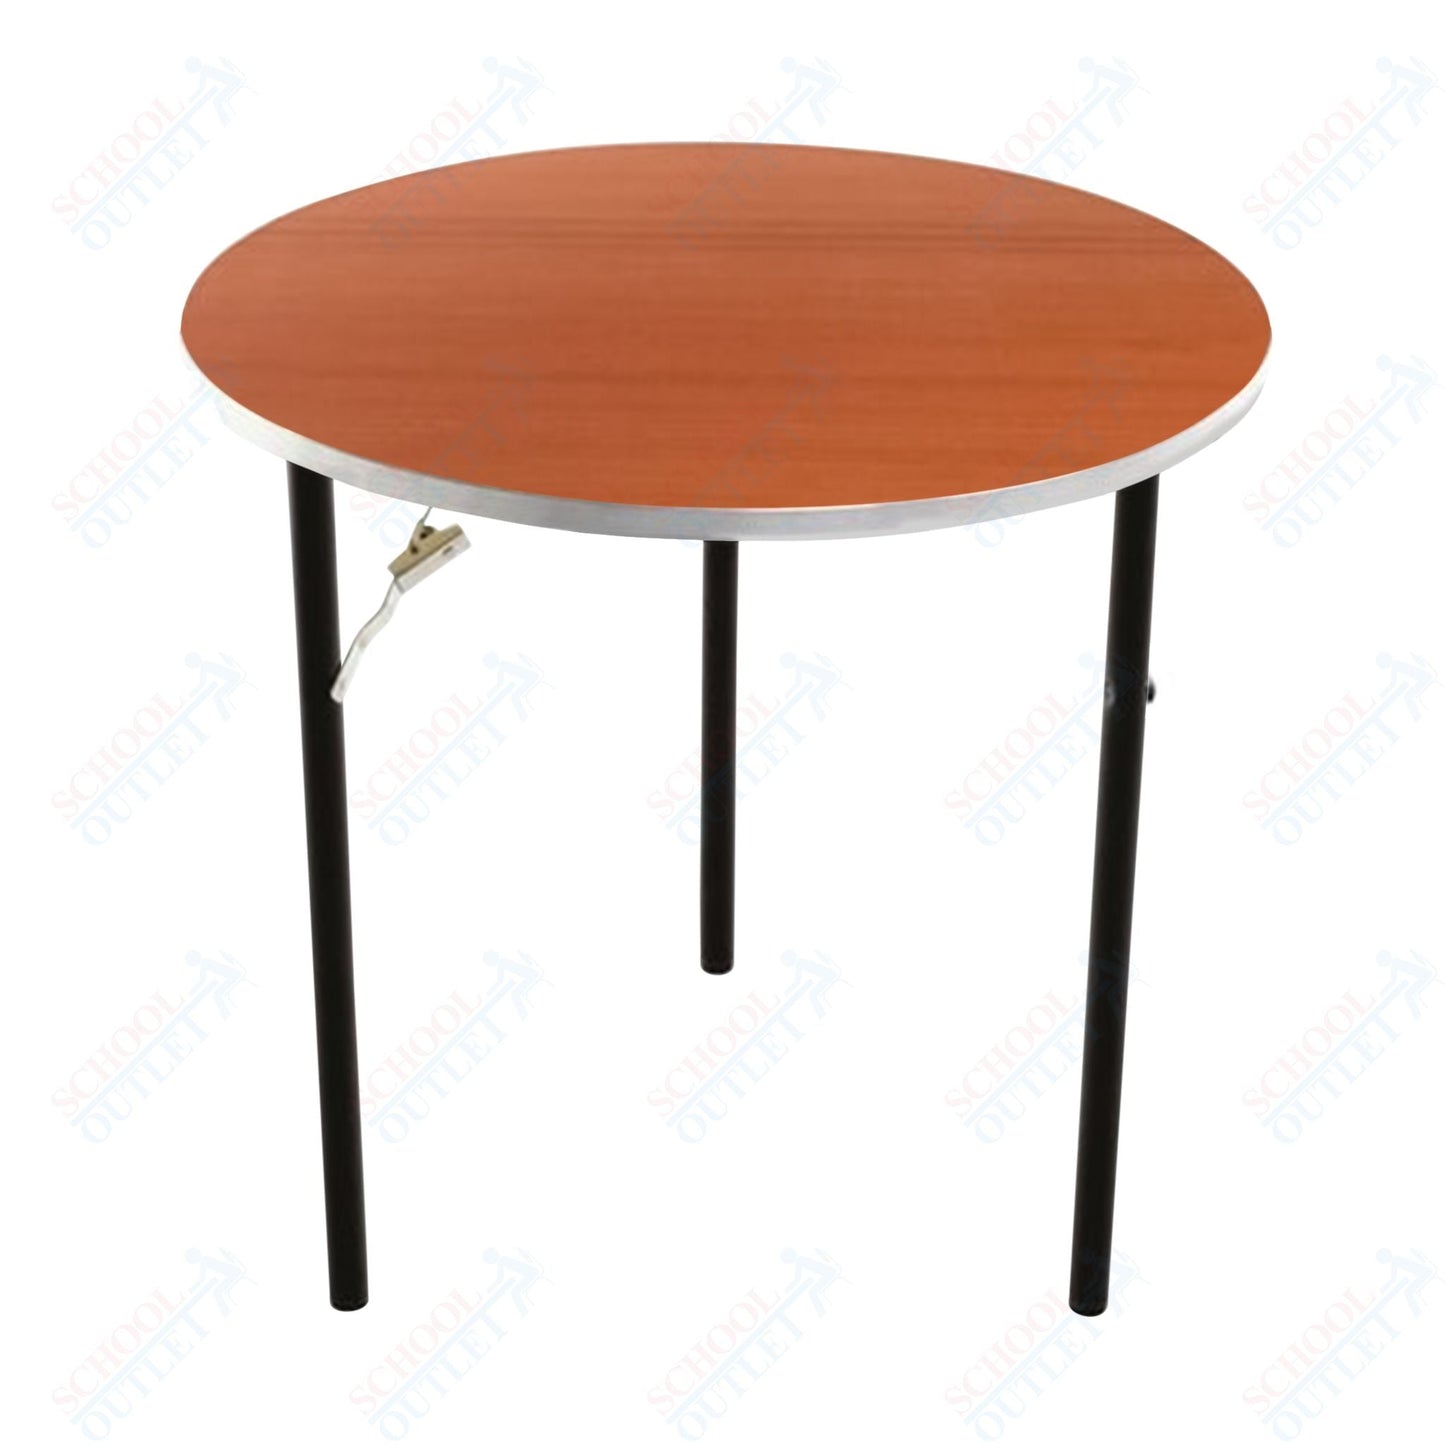 AmTab Folding Table - Plywood Stained and Sealed - Aluminum Edge - Round - 60" Diameter x 29"H (AmTab AMT - R60PA) - SchoolOutlet